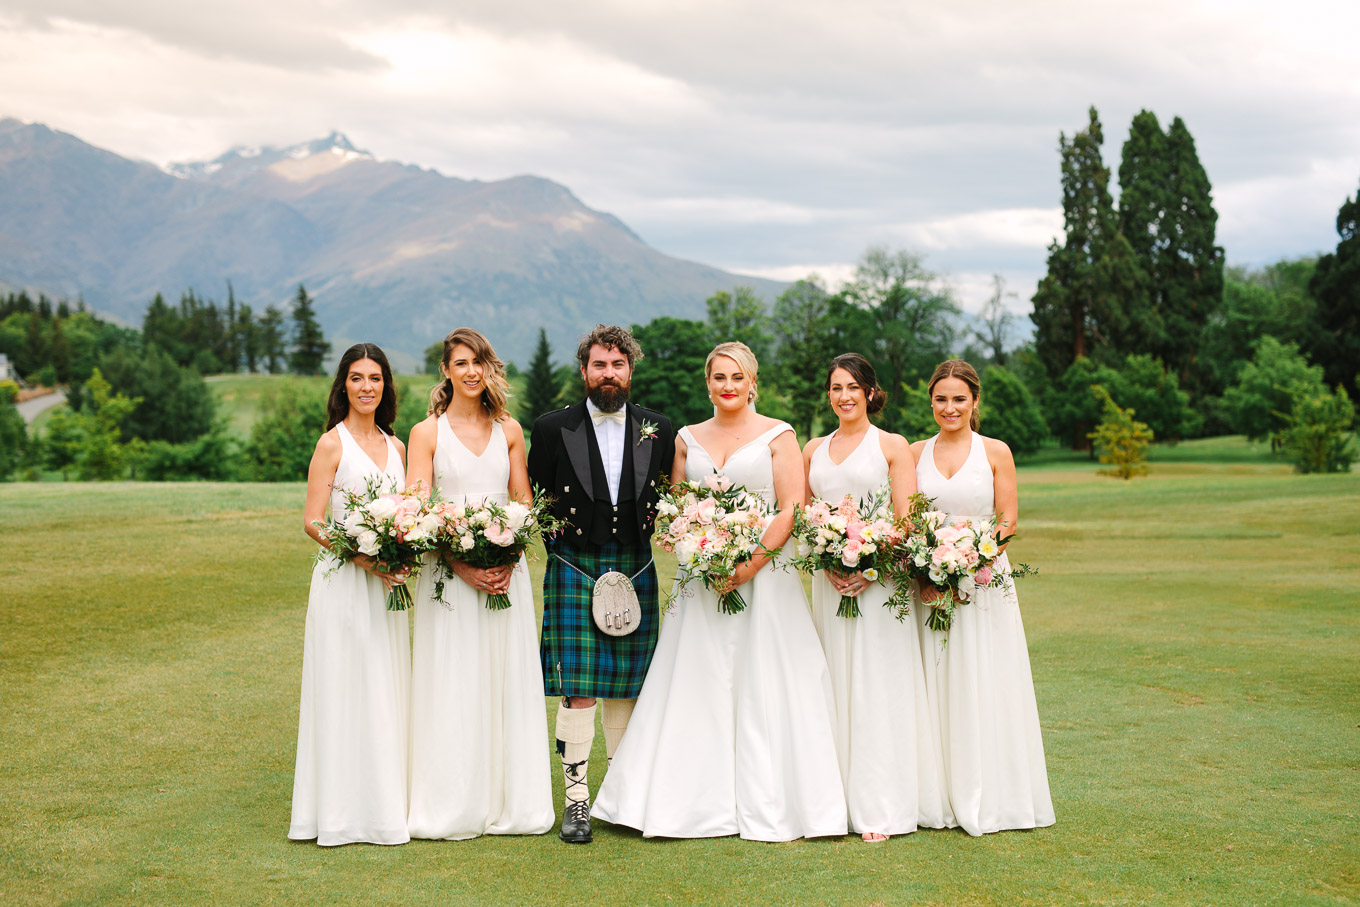 Bridal party with beautiful mountain backdrop. Millbrook Resort Queenstown New Zealand wedding by Mary Costa Photography | www.marycostaweddings.com